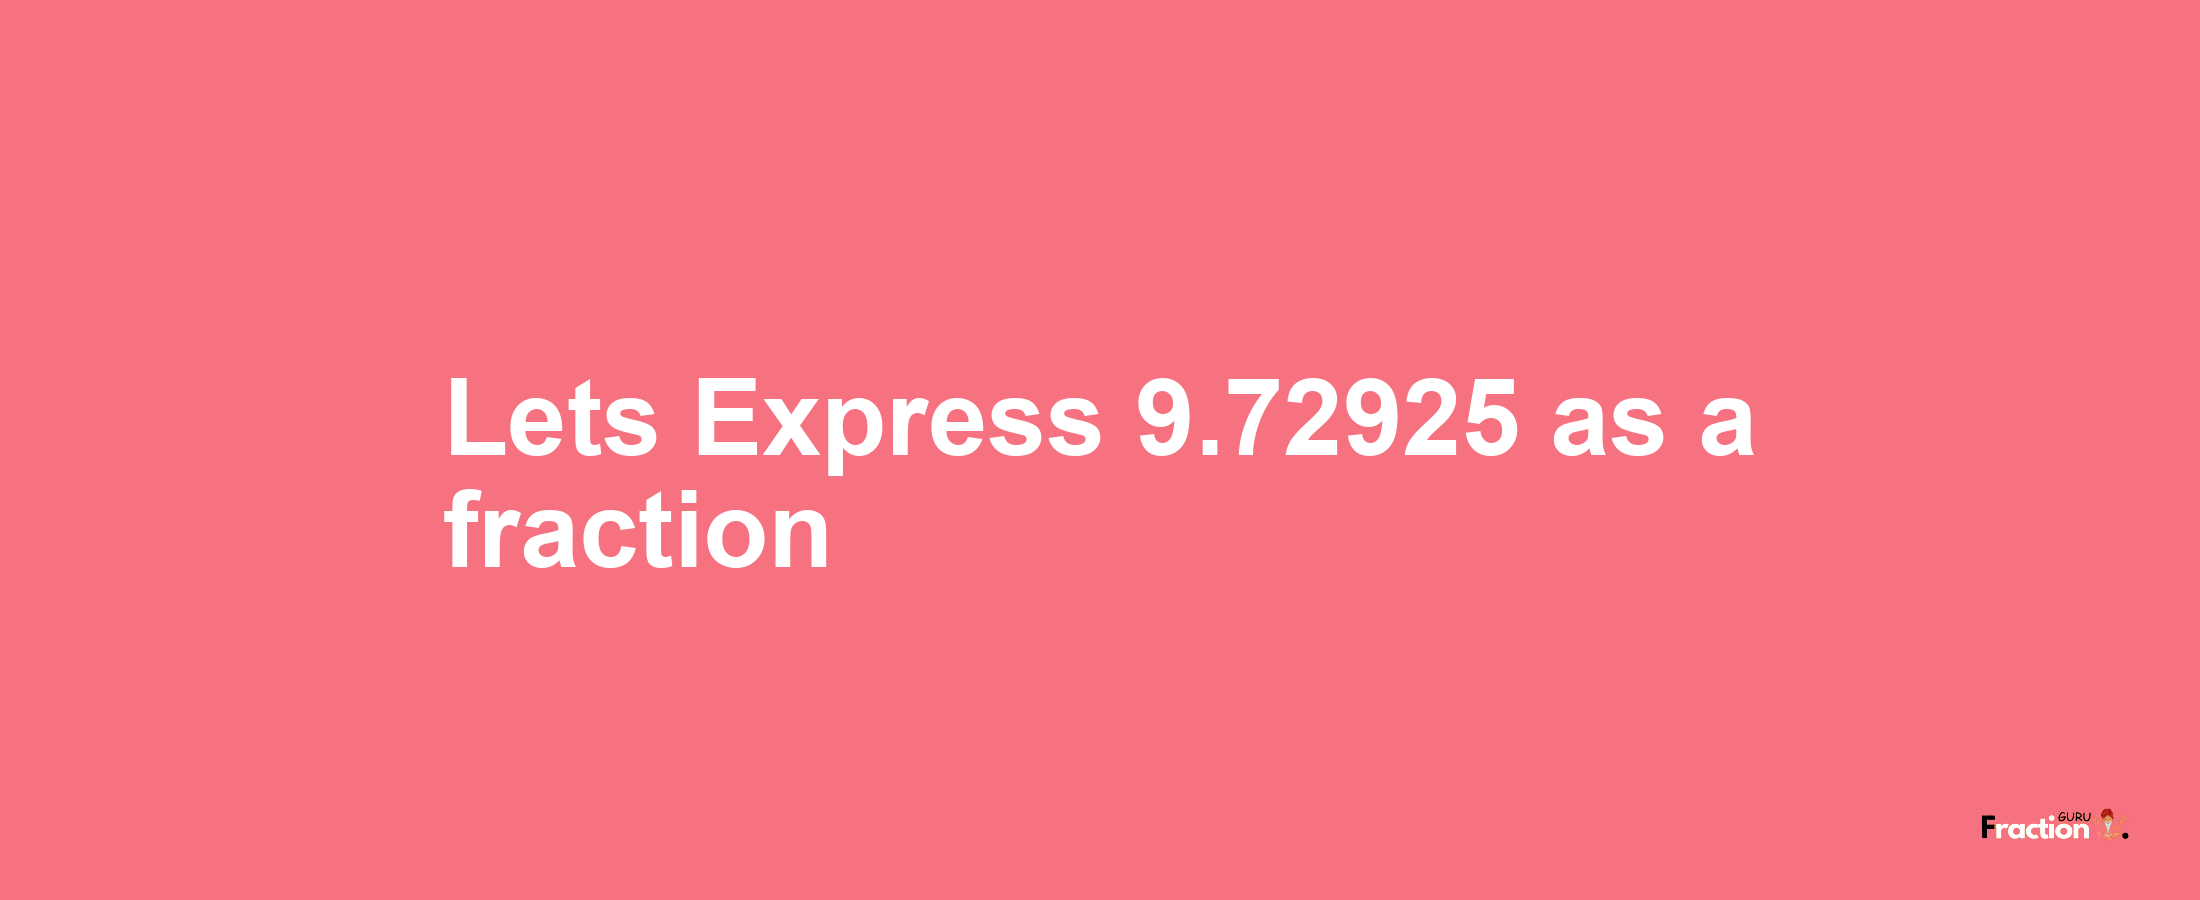 Lets Express 9.72925 as afraction